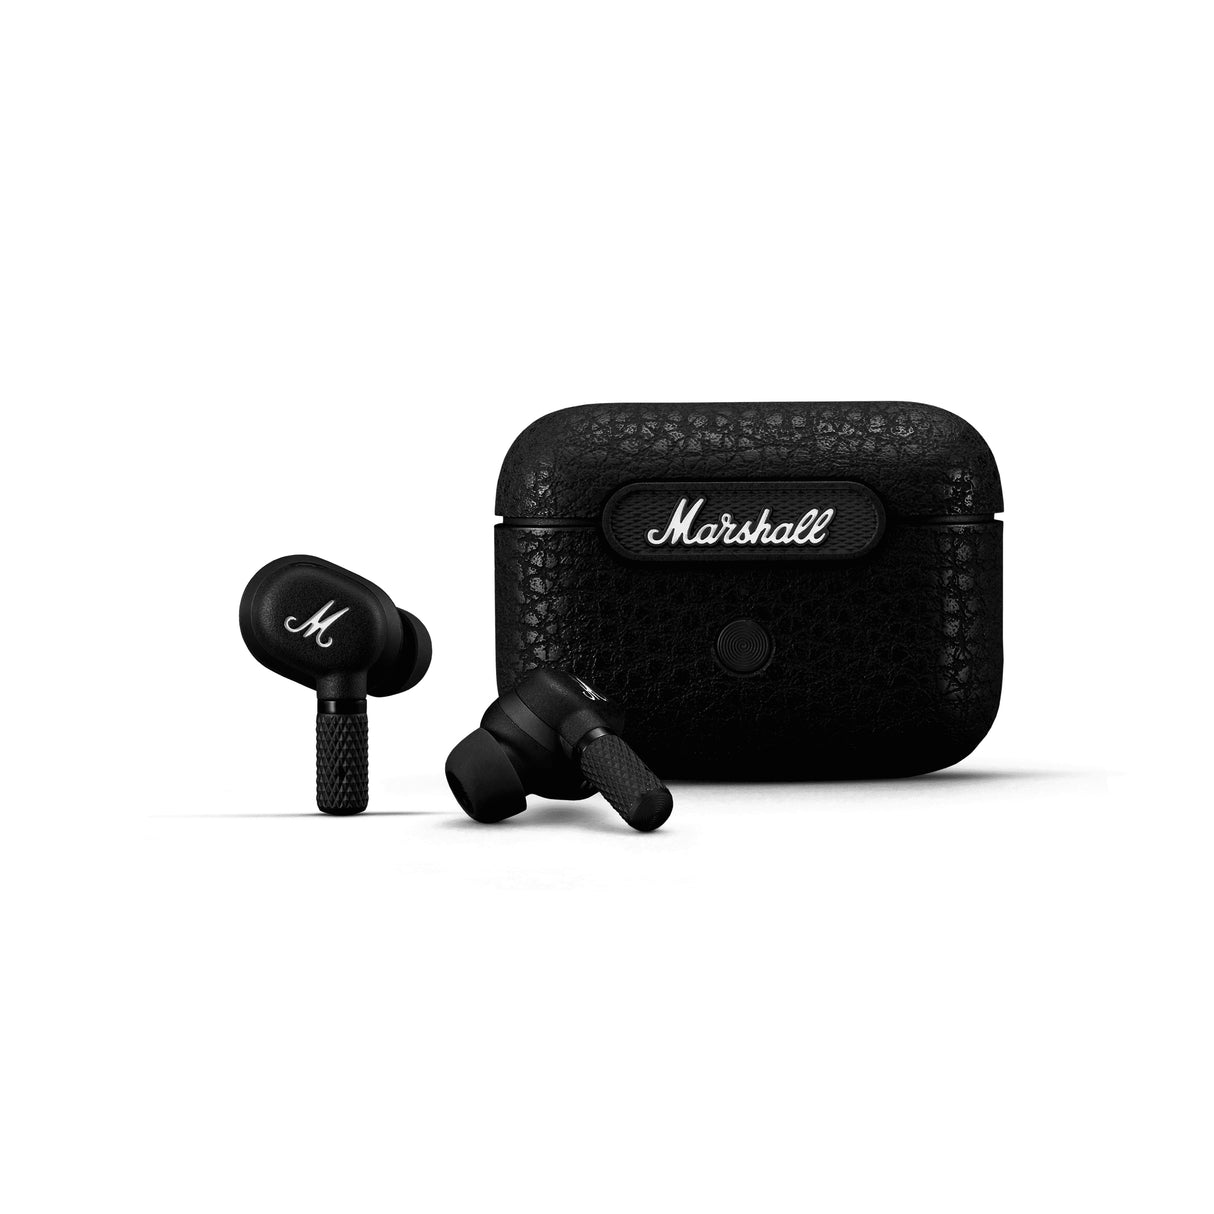 Marshall Motif A.N.C - Wireless Headphones with Noise Cancellation (Black)